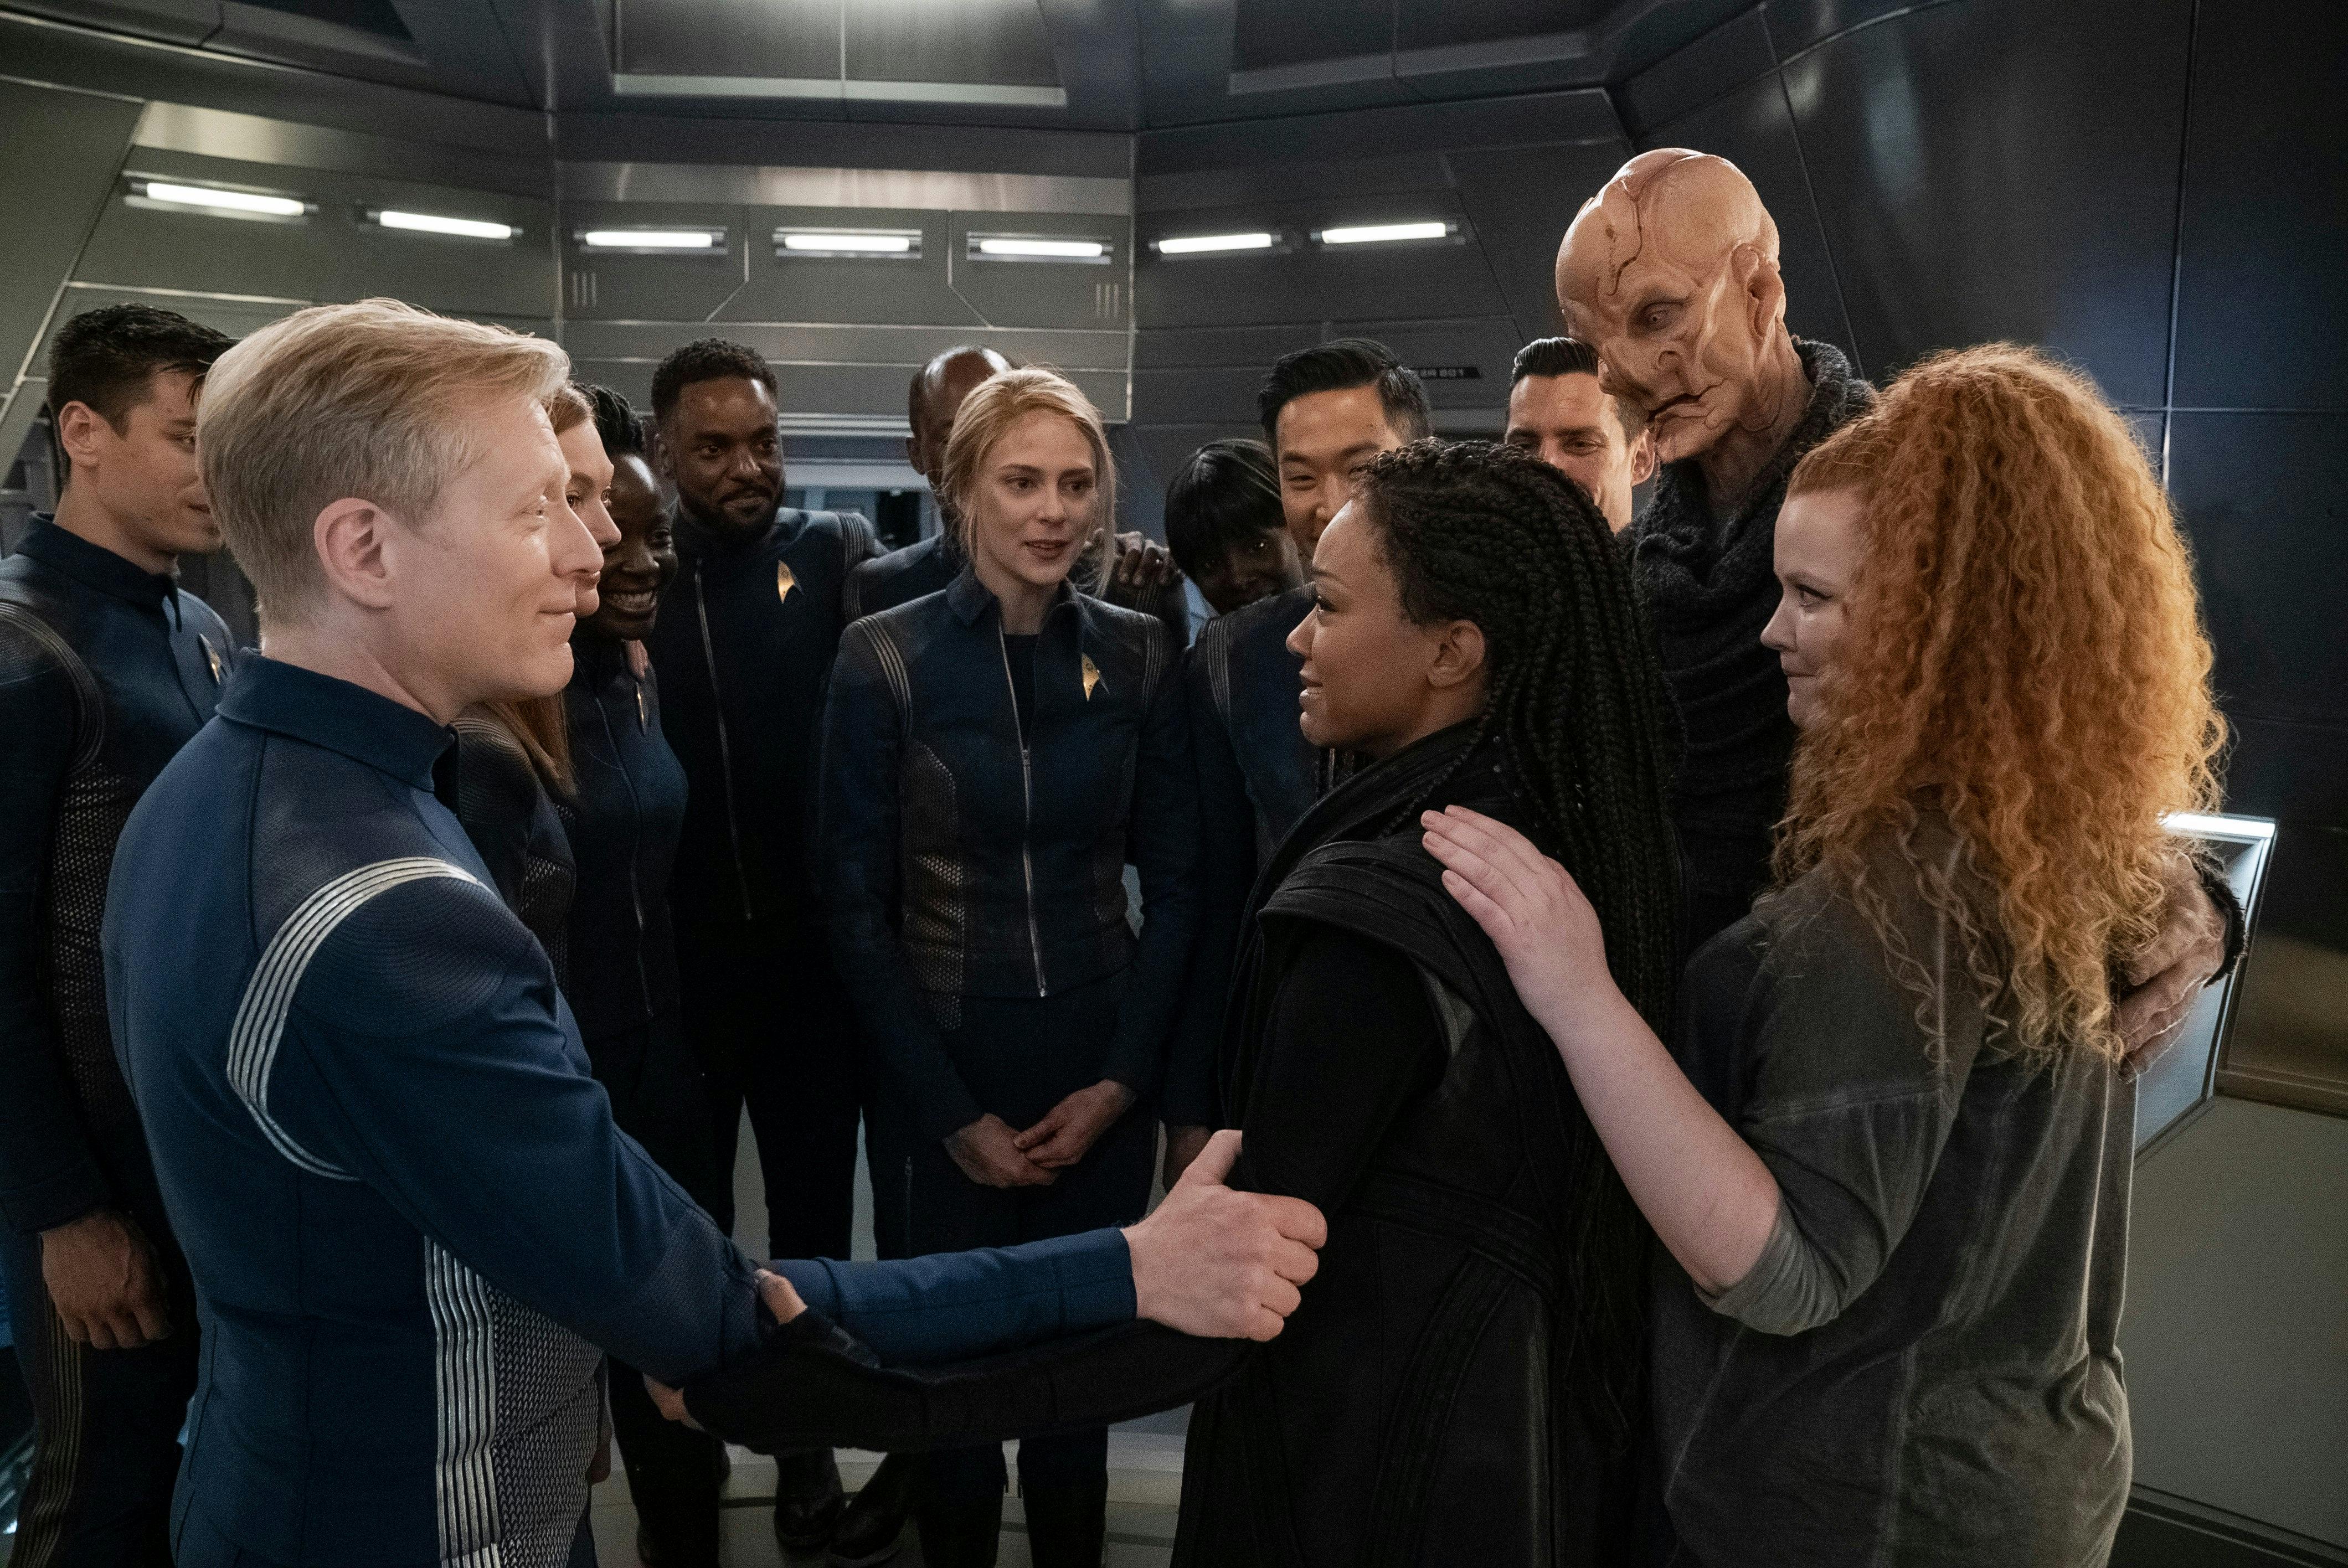 Star Trek: Discovery: - "People Of Earth"